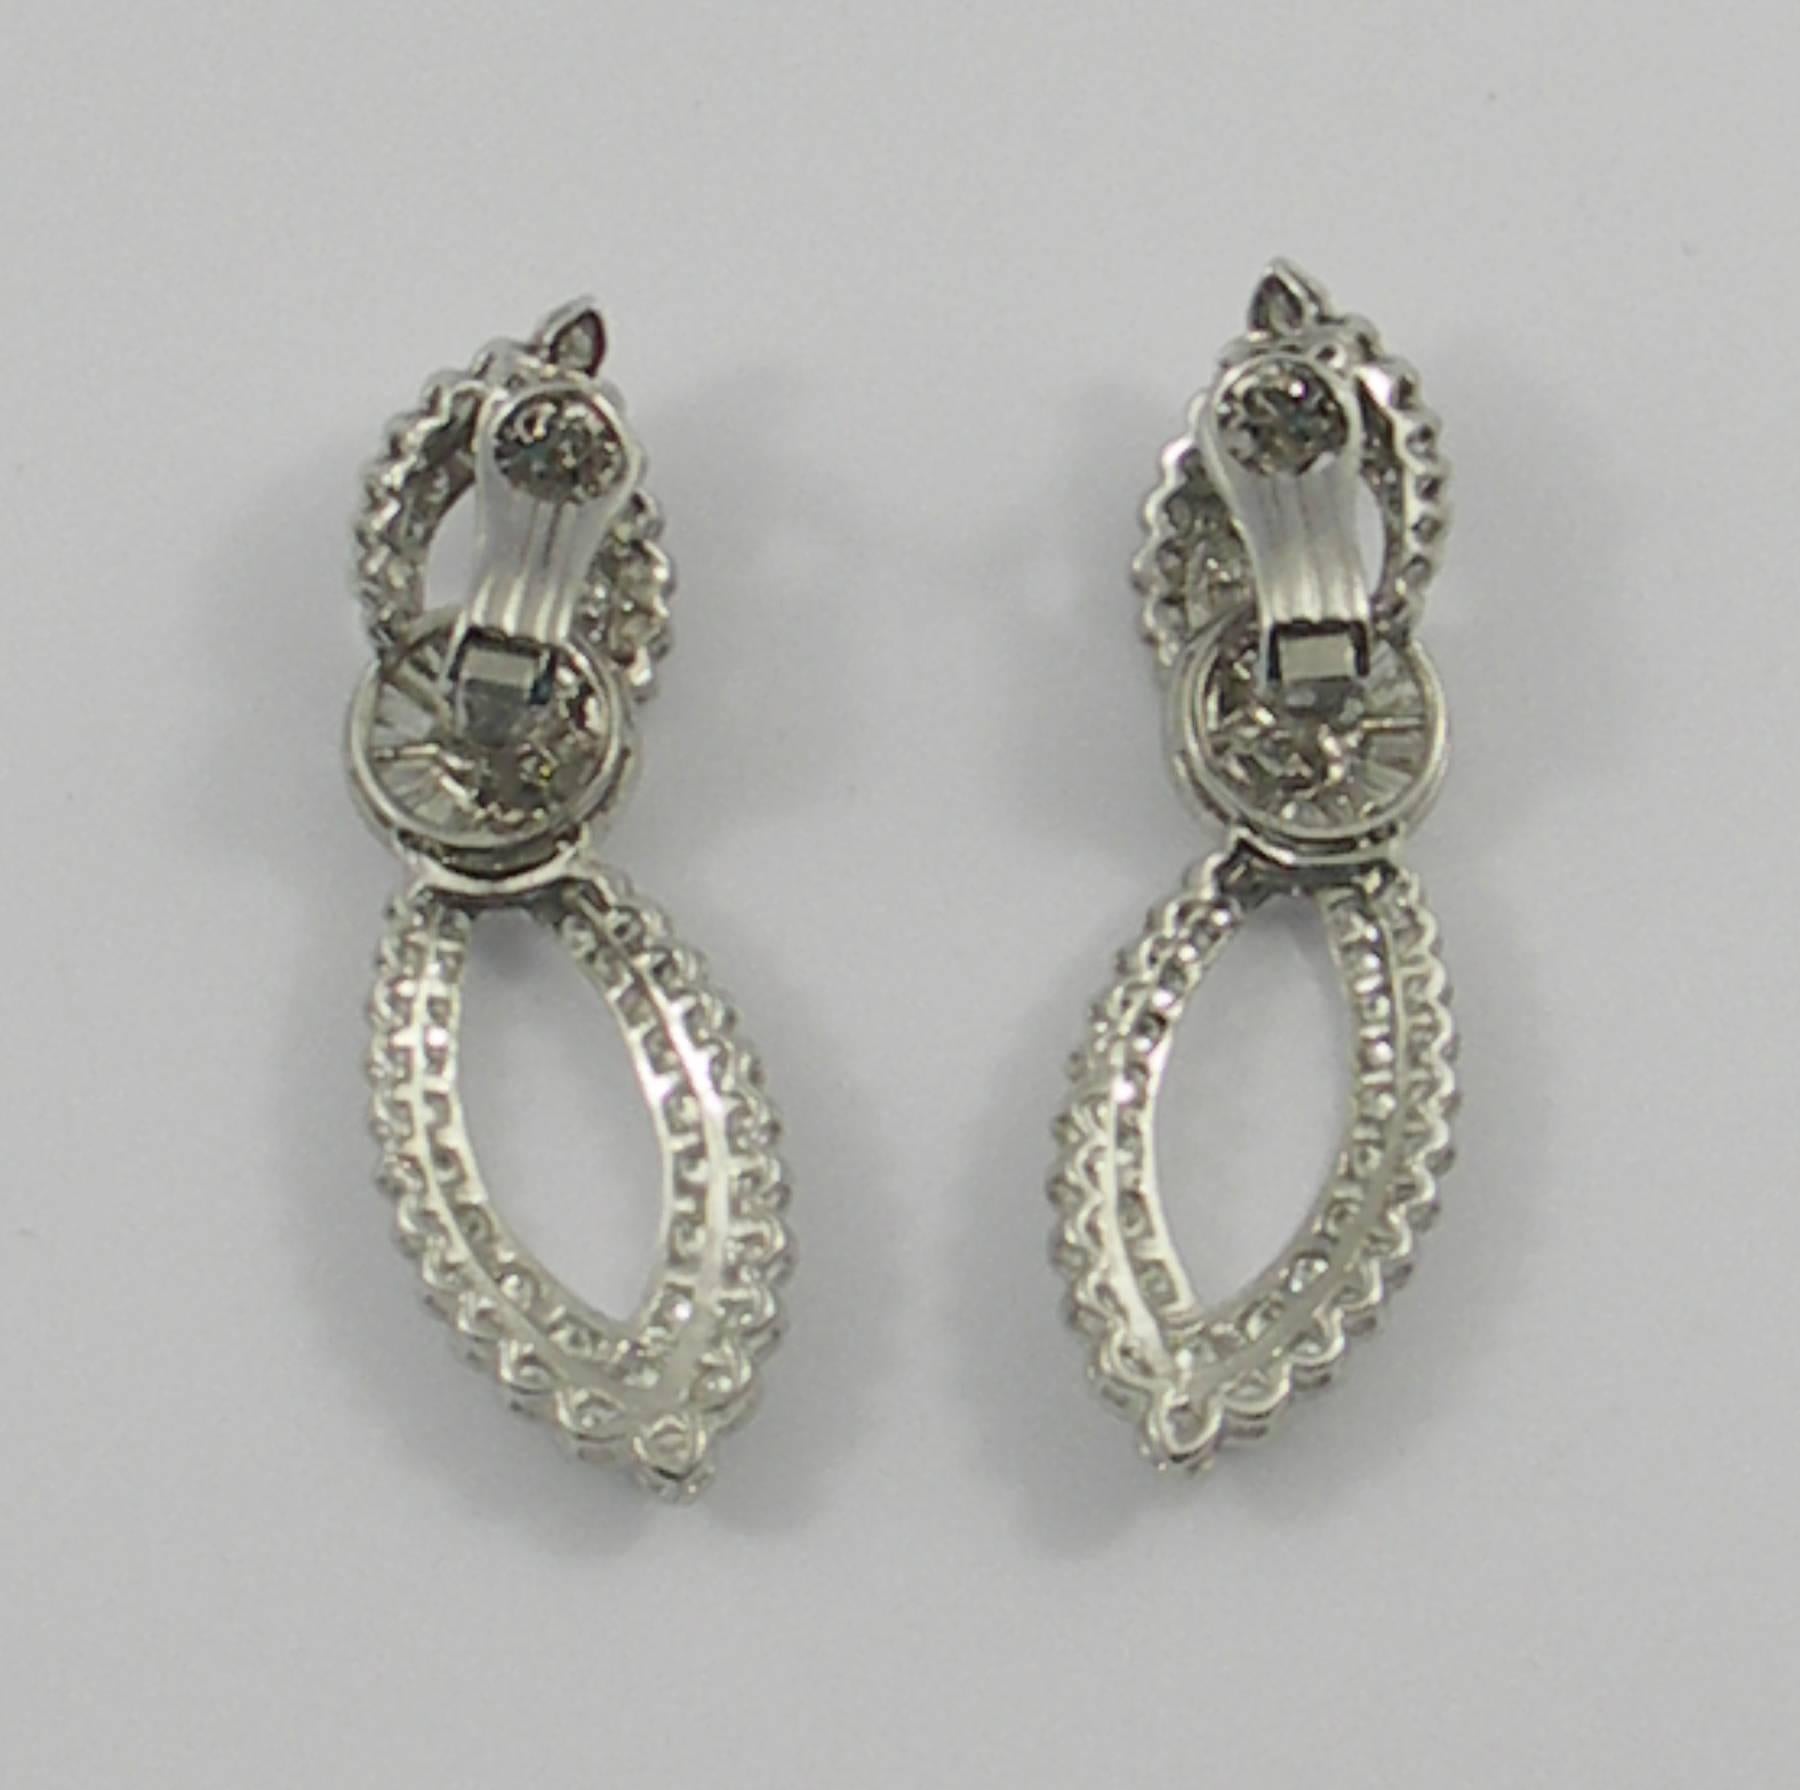 Tailored Looking White Gold Hanging Earrings Set with Diamonds 4